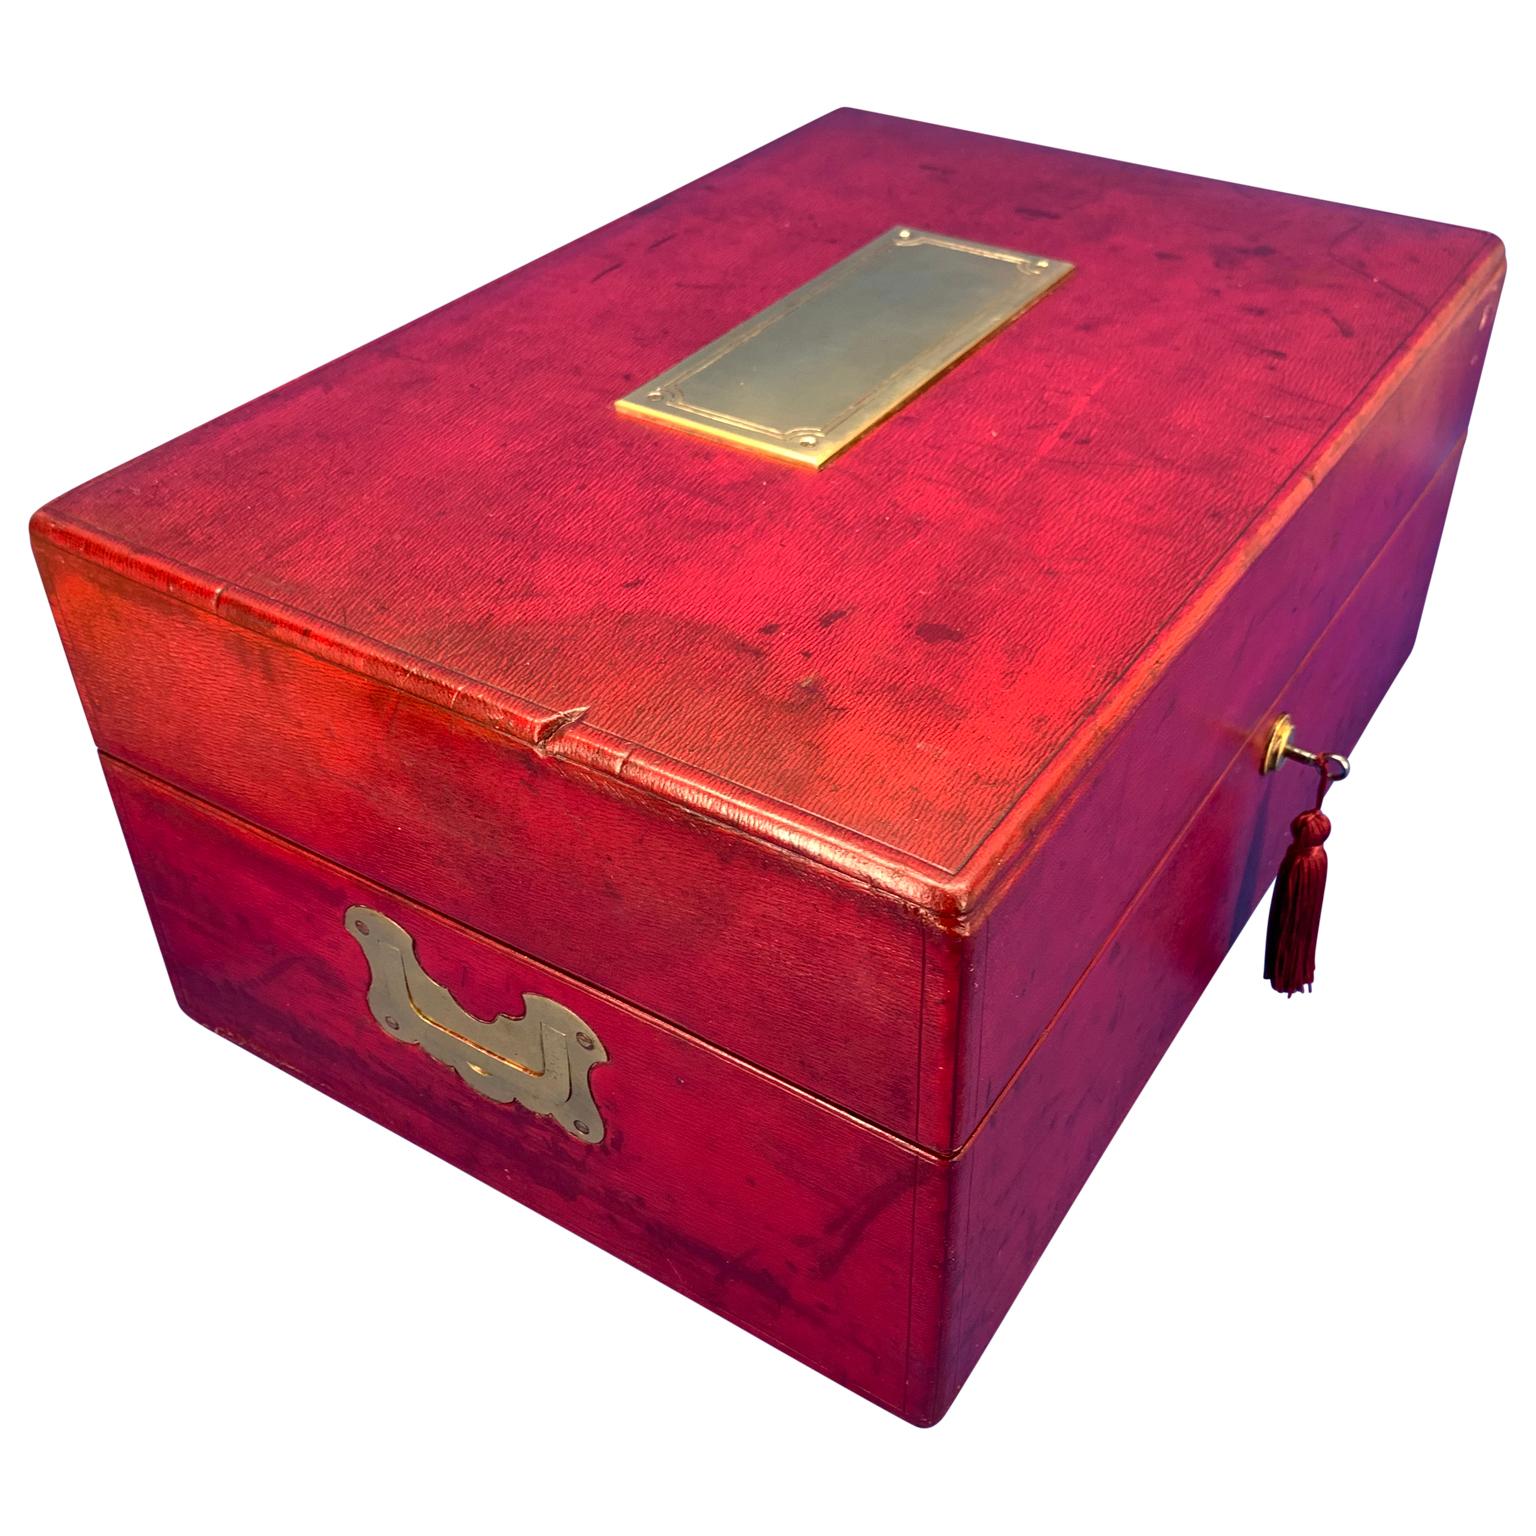 Hand-Crafted 19th Century Red Moroccan Leather Documents Strong Box or Jewelry Cabinet